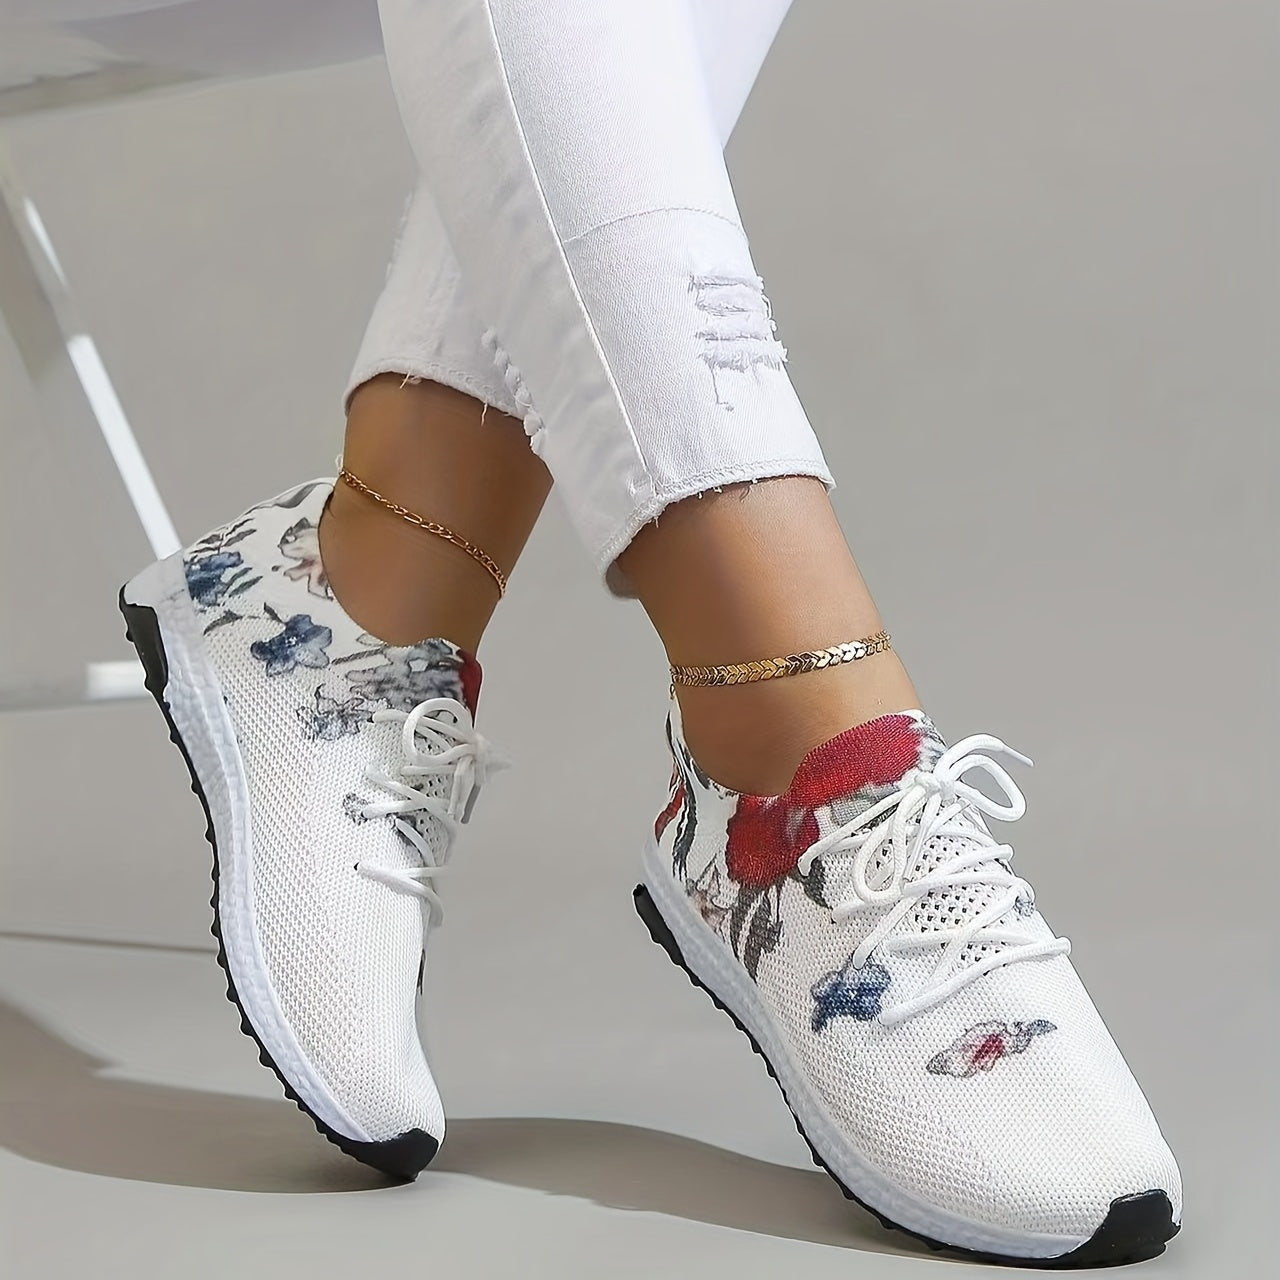 「binfenxie」Women's Floral Print Sneakers, Lightweight Low Top Lace Up Shoes, Women's Breathable Knit Shoes